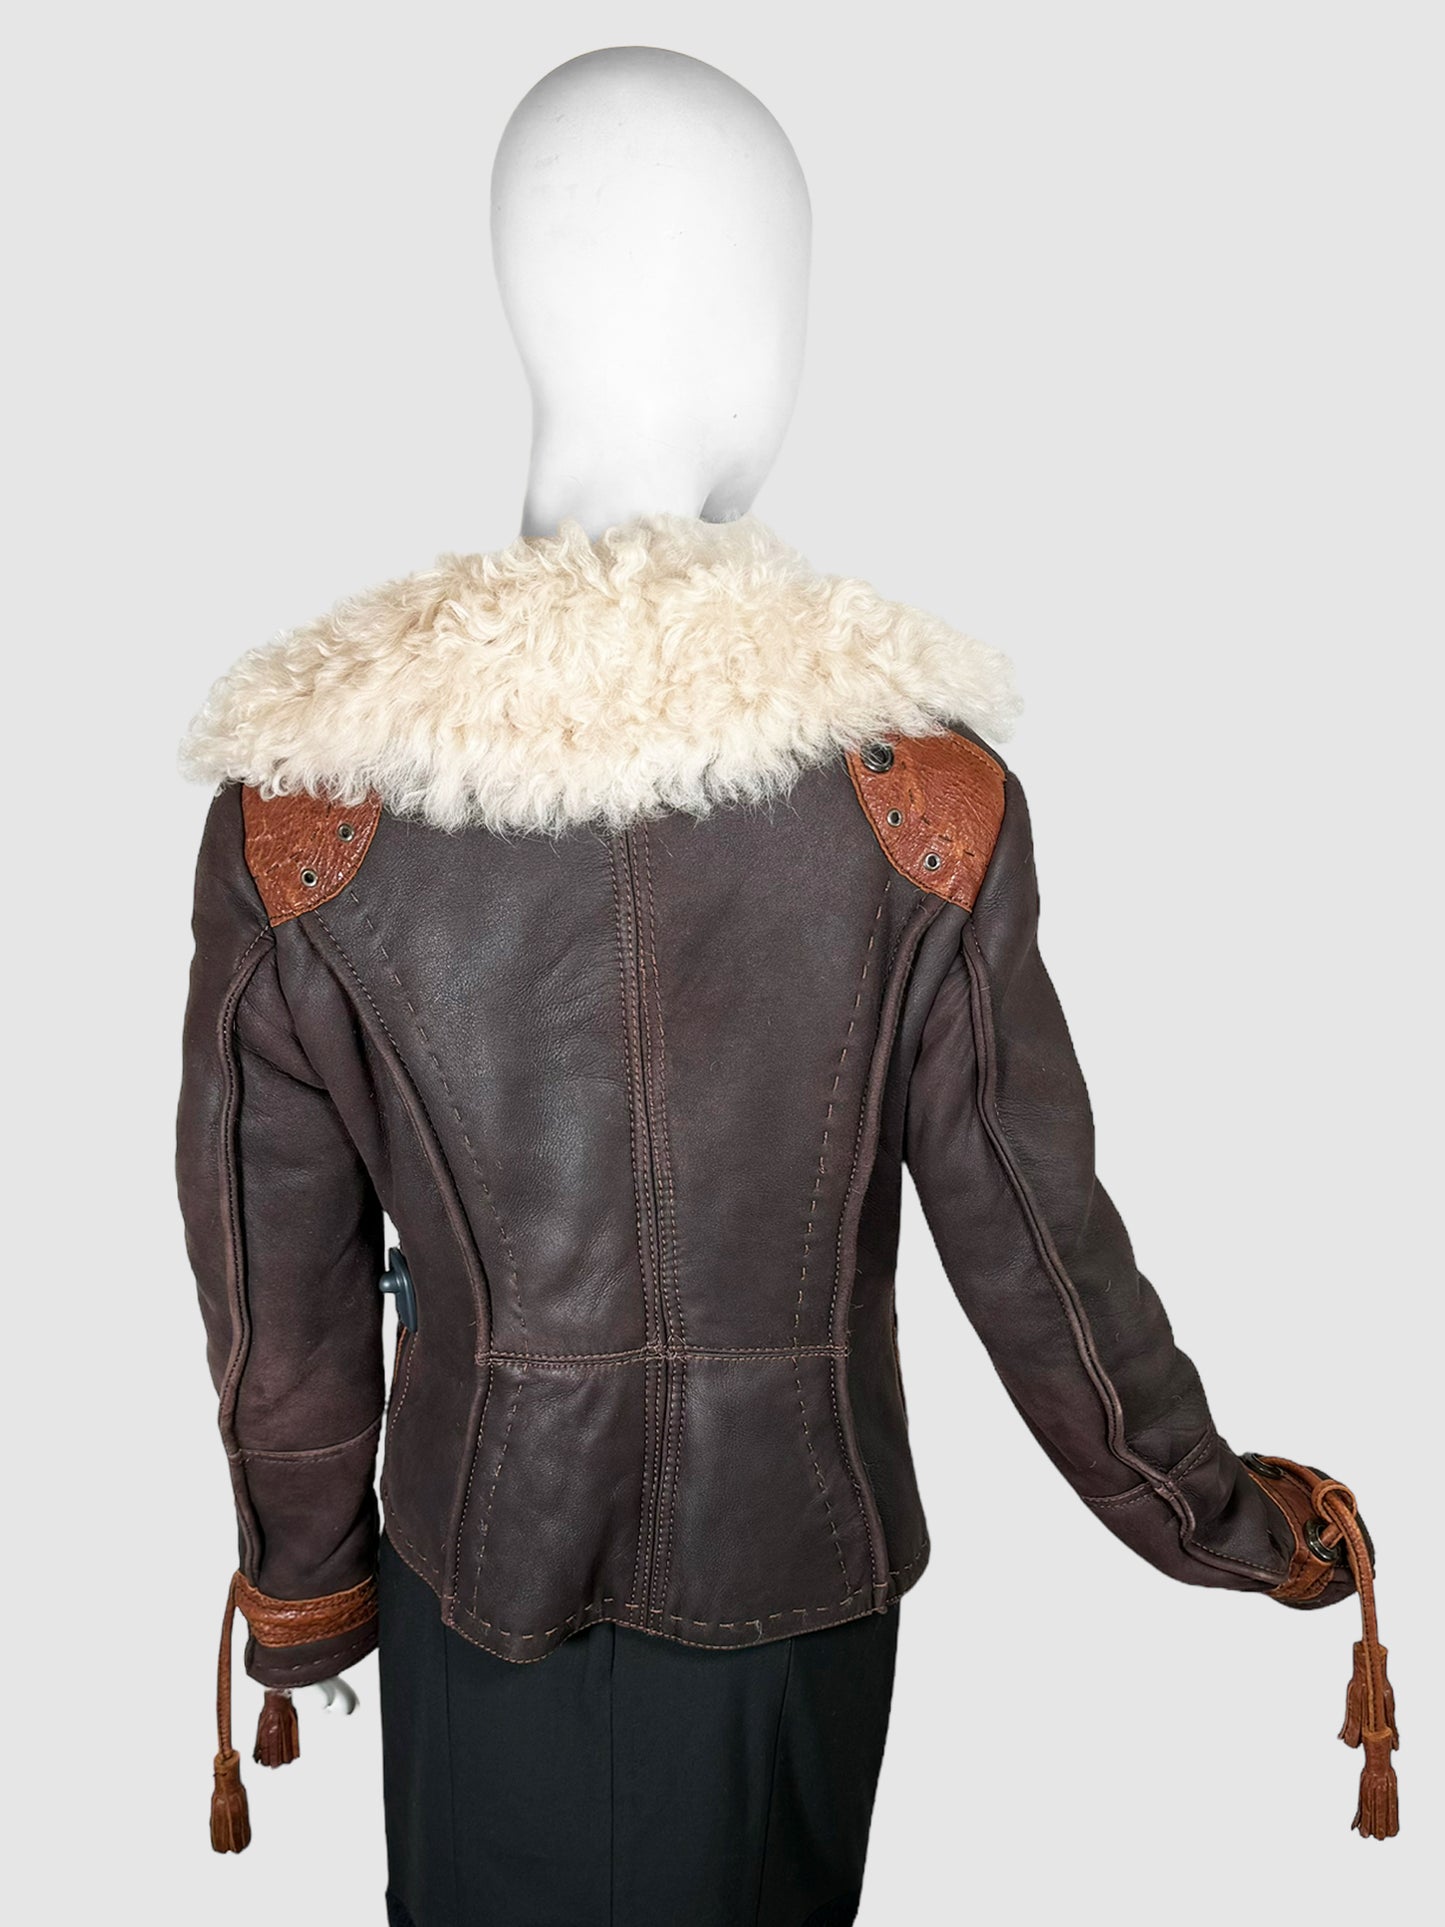 Just Cavalli Leather Jacket with Sherpa Collar - Size S